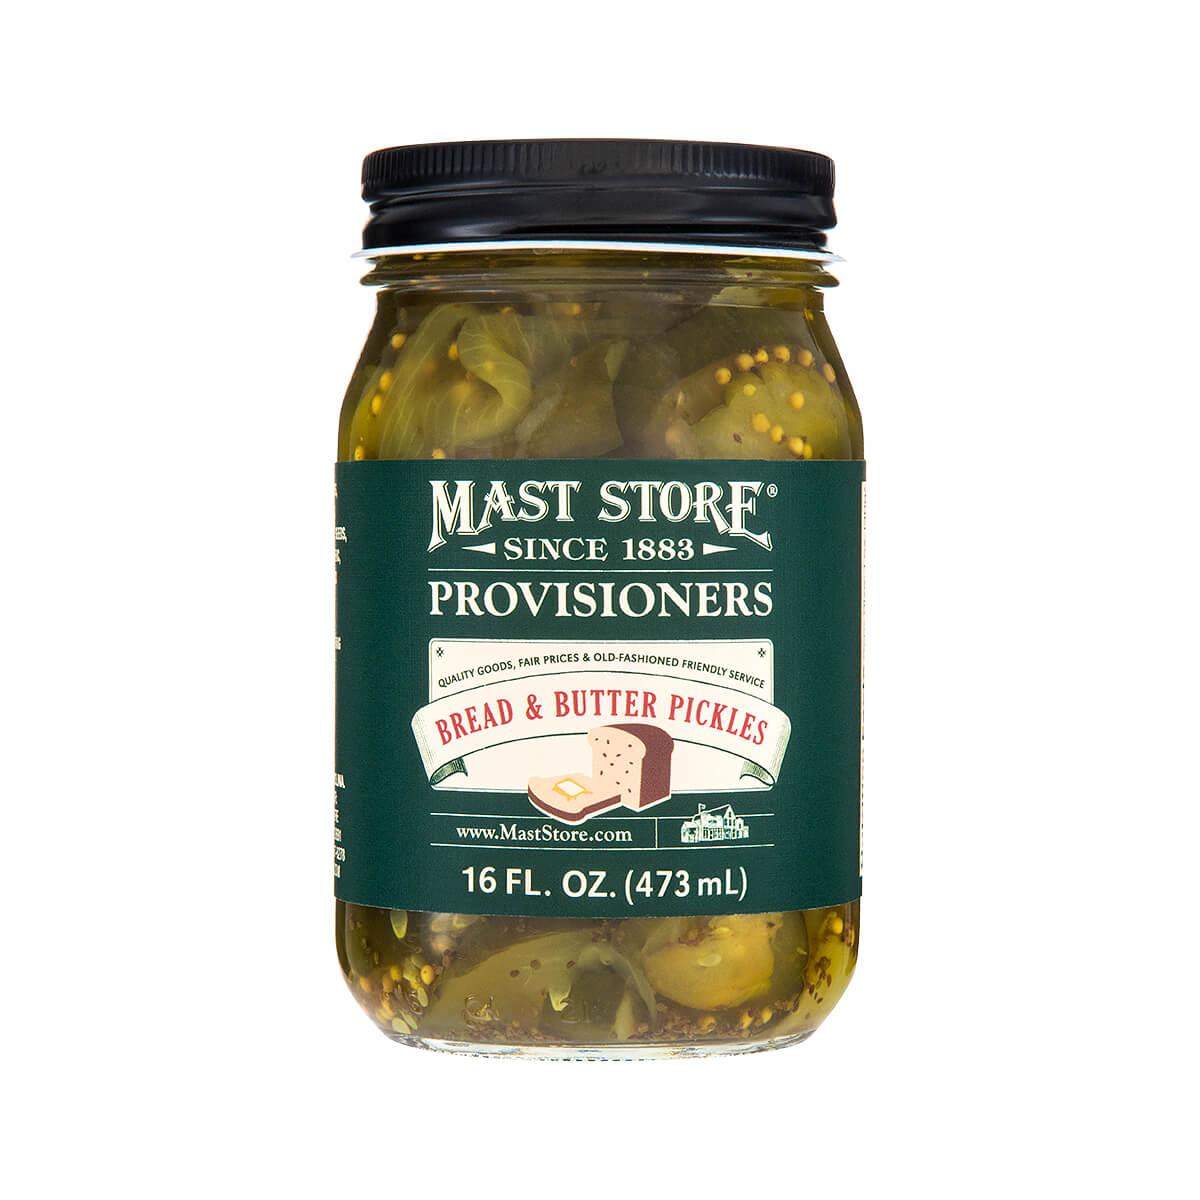  Mast Store Provisioners Bread And Butter Pickles